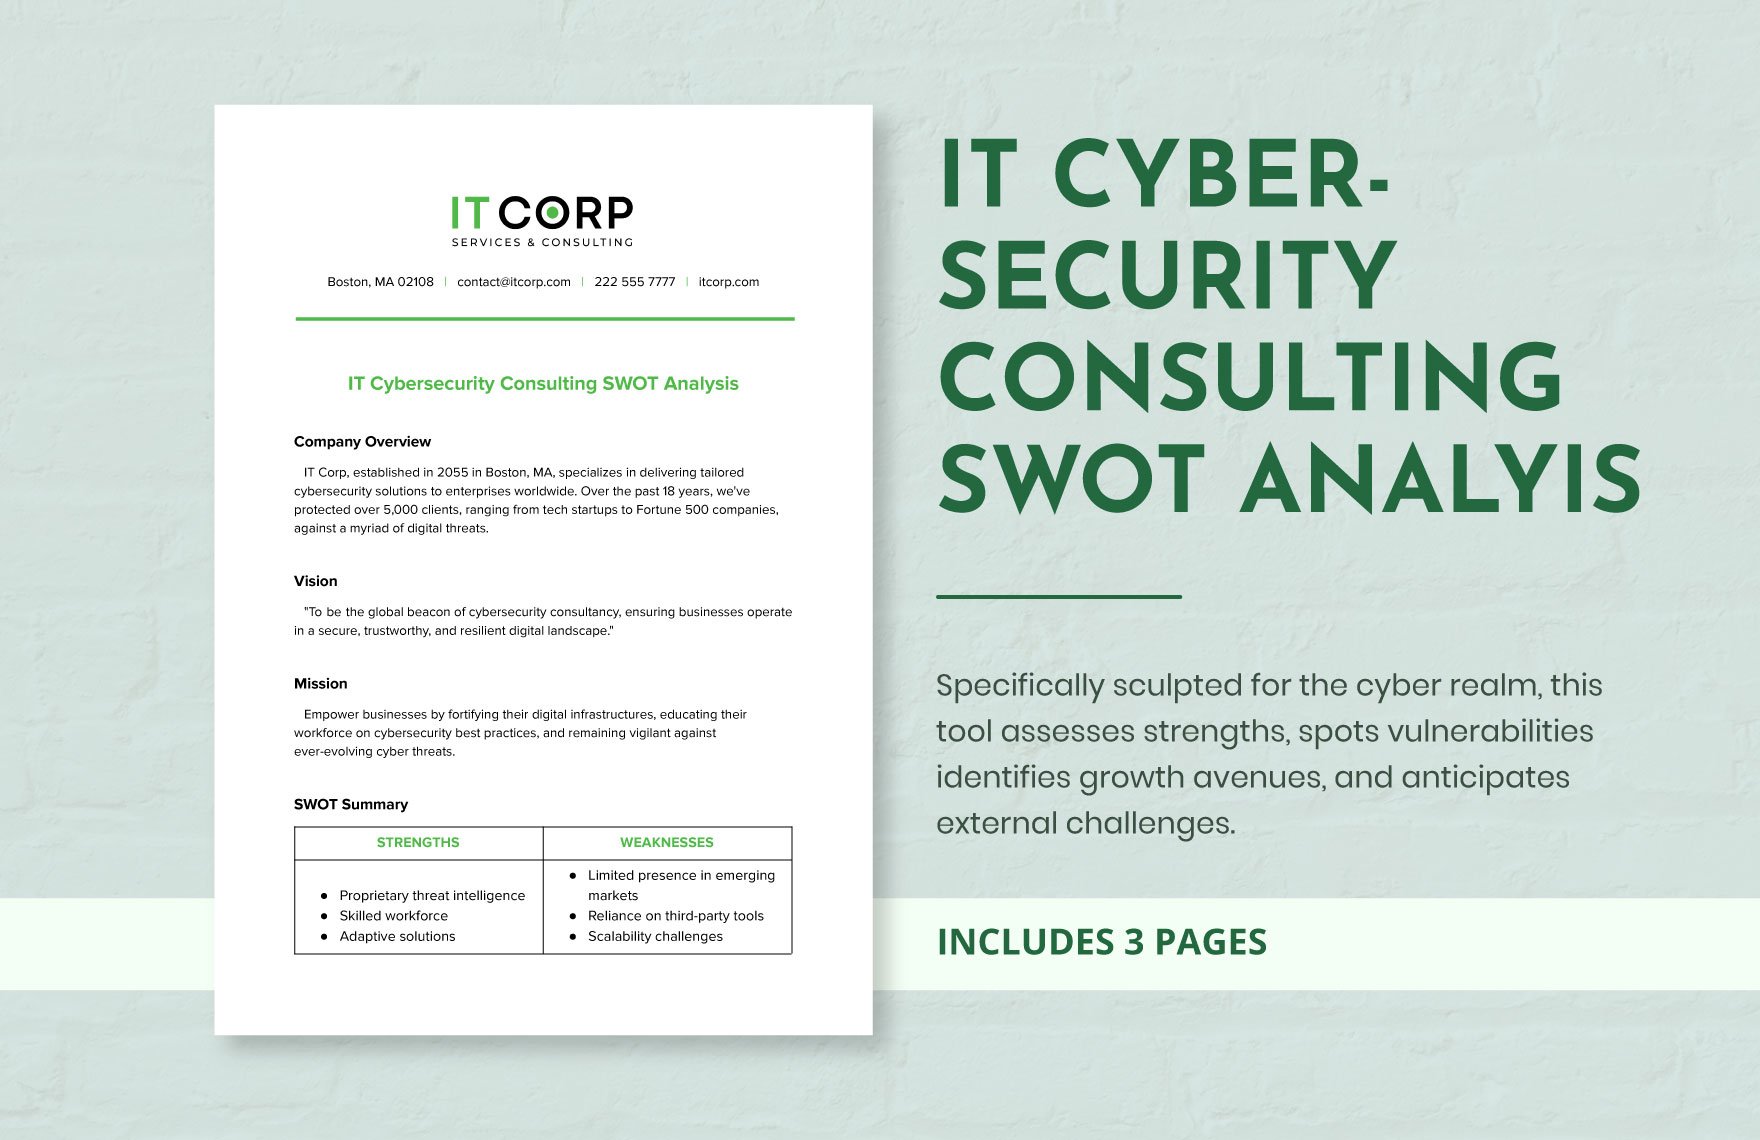 IT Cybersecurity Consulting SWOT Analysis Template in Word, Google Docs, PDF